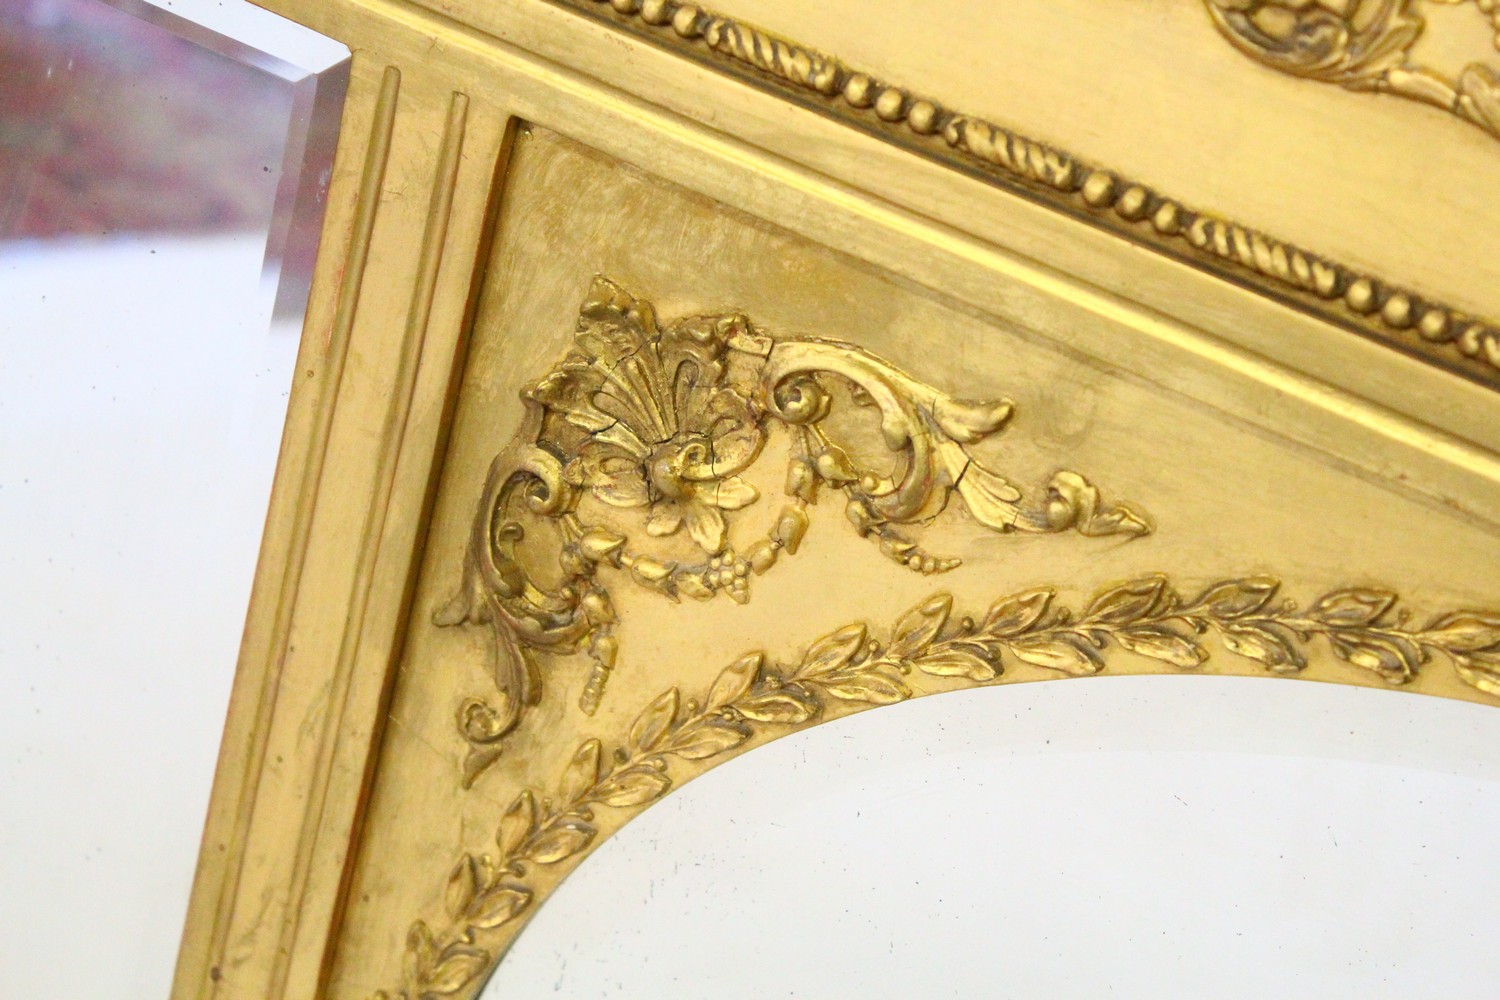 A VERY GOOD GILTWOOD OVERMANTLE MIRROR with oval mirrored panels and rectangular mirror in an ornate - Image 3 of 6